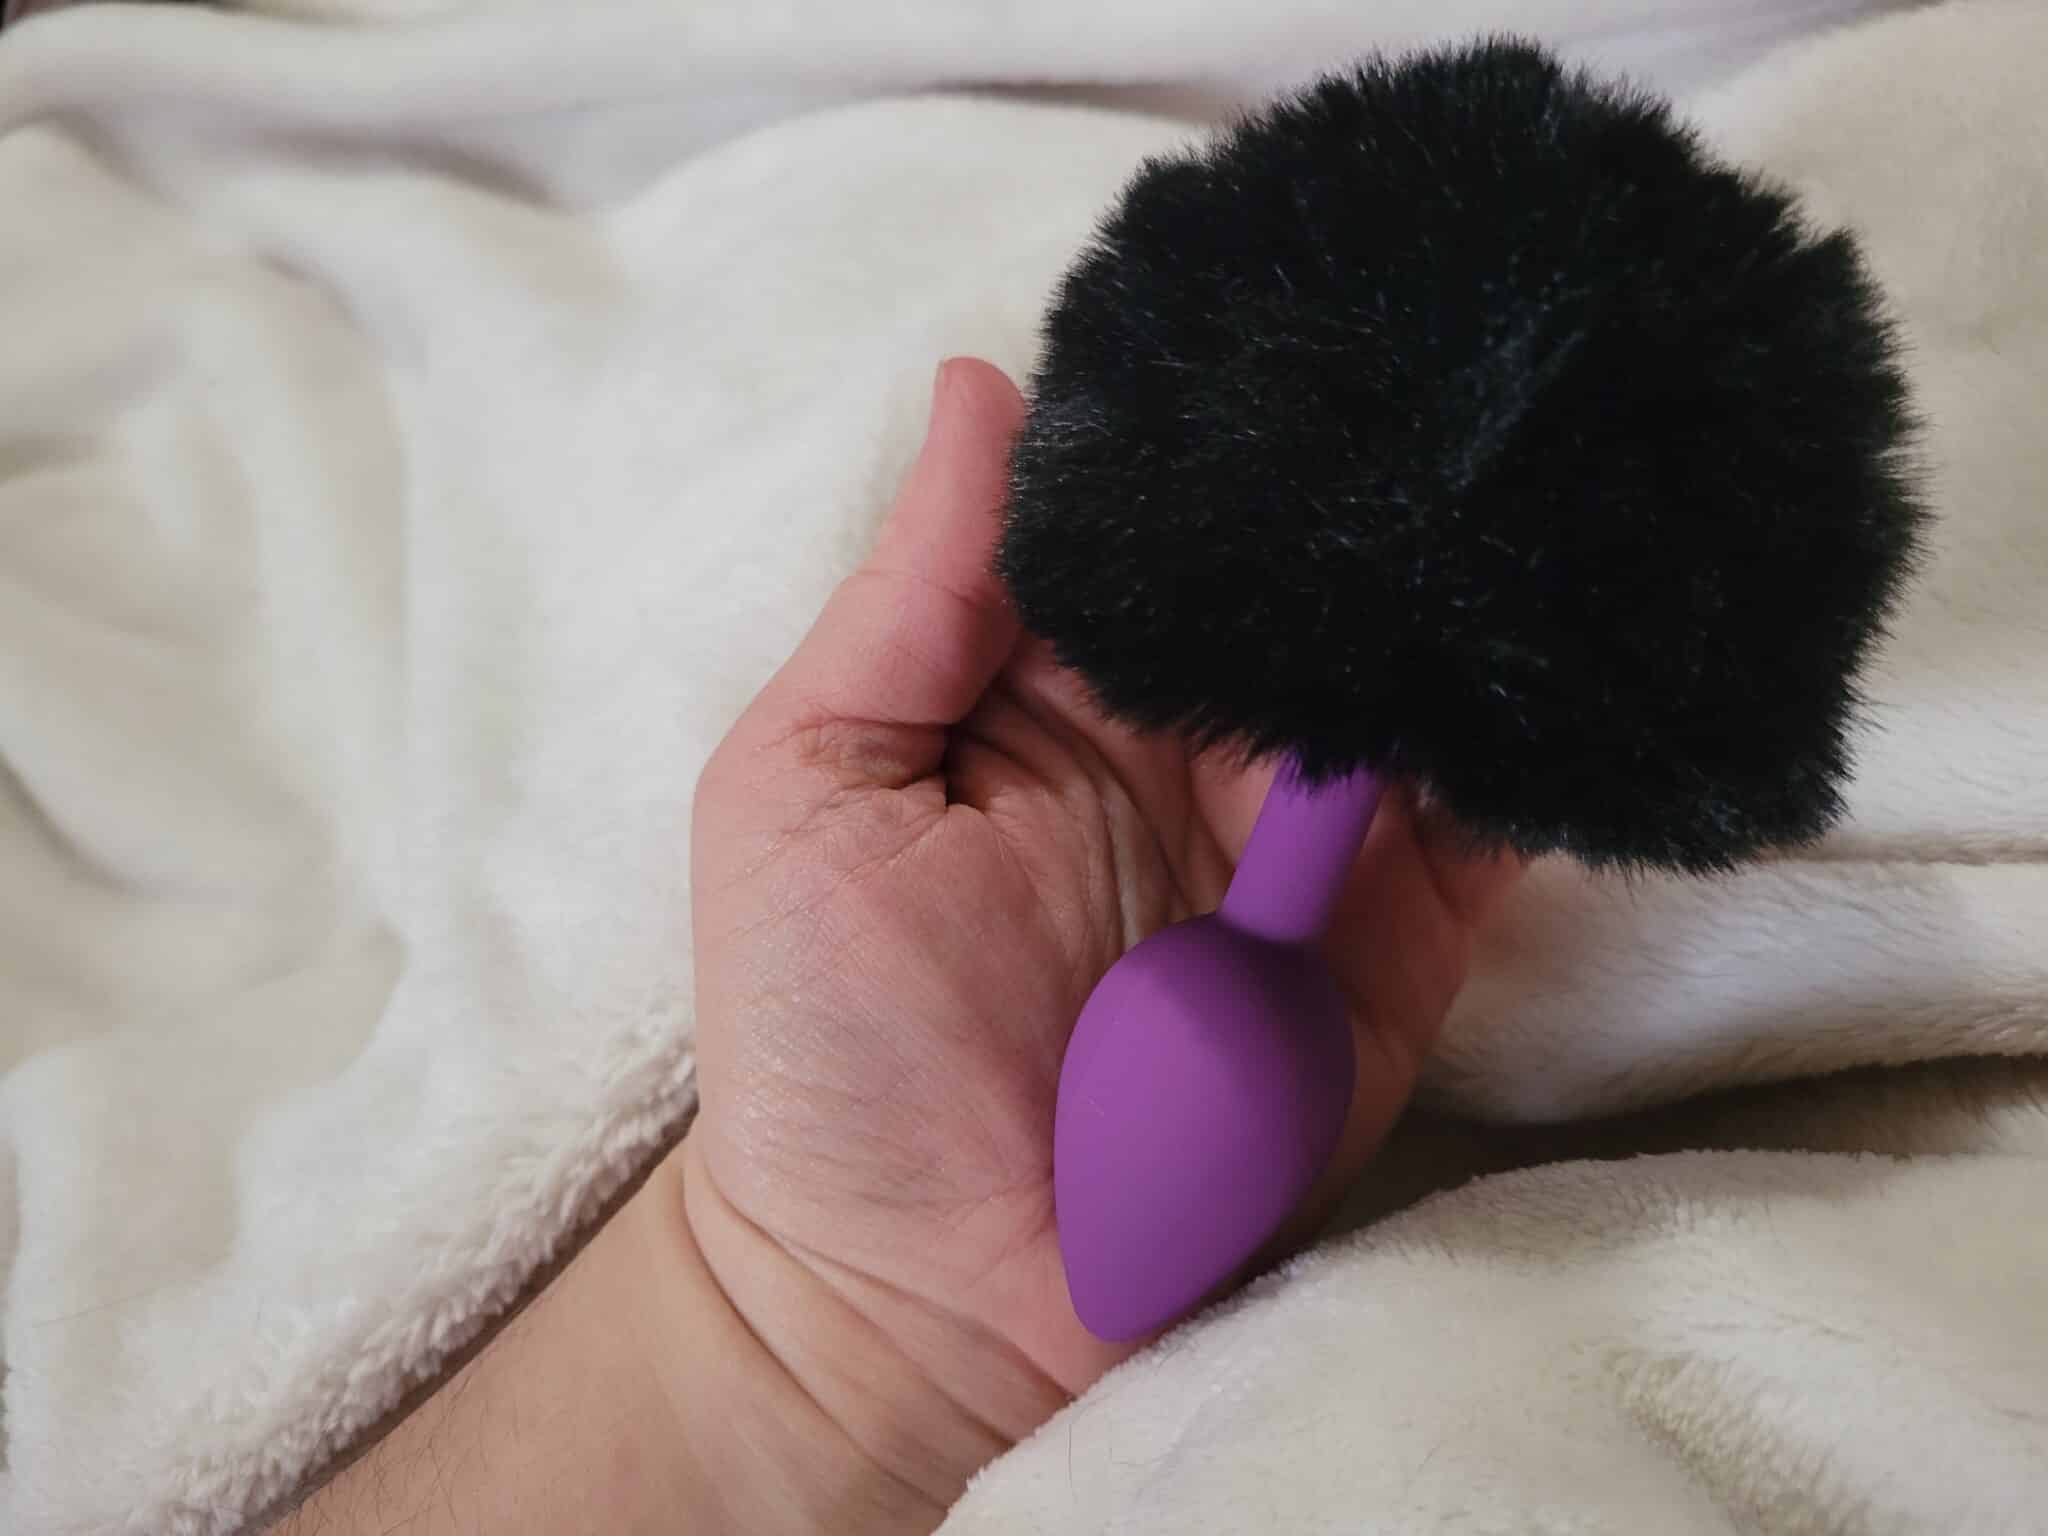 EdenFantasys Bunny Tail Plug Unwrapping Excitement: A Packaging Review